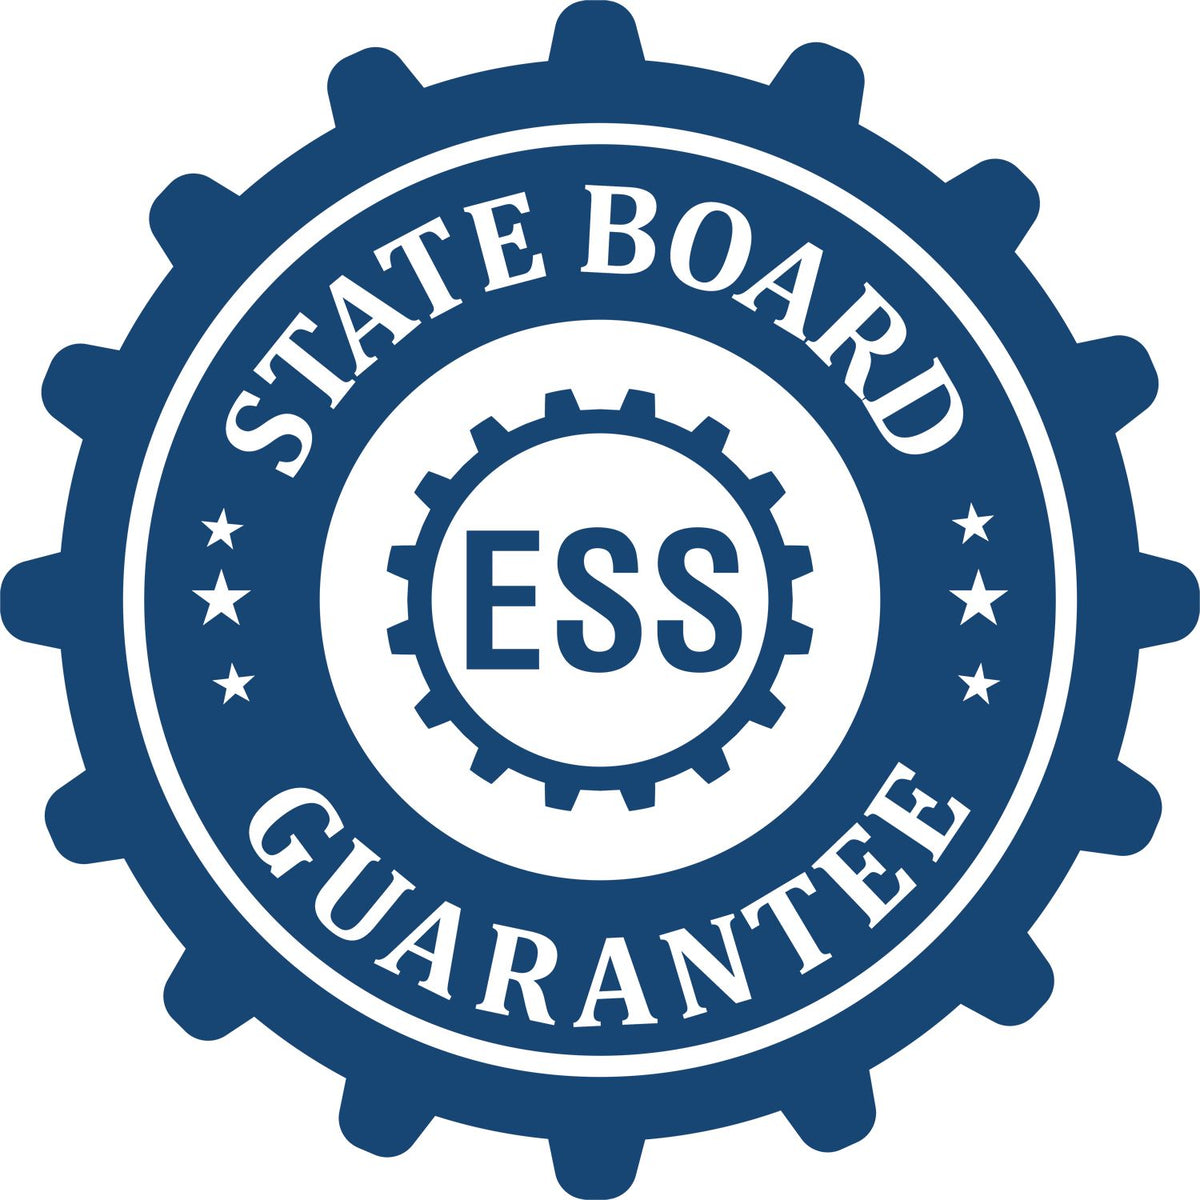 An emblem in a gear shape illustrating a state board guarantee for the Handheld Iowa Land Surveyor Seal product.